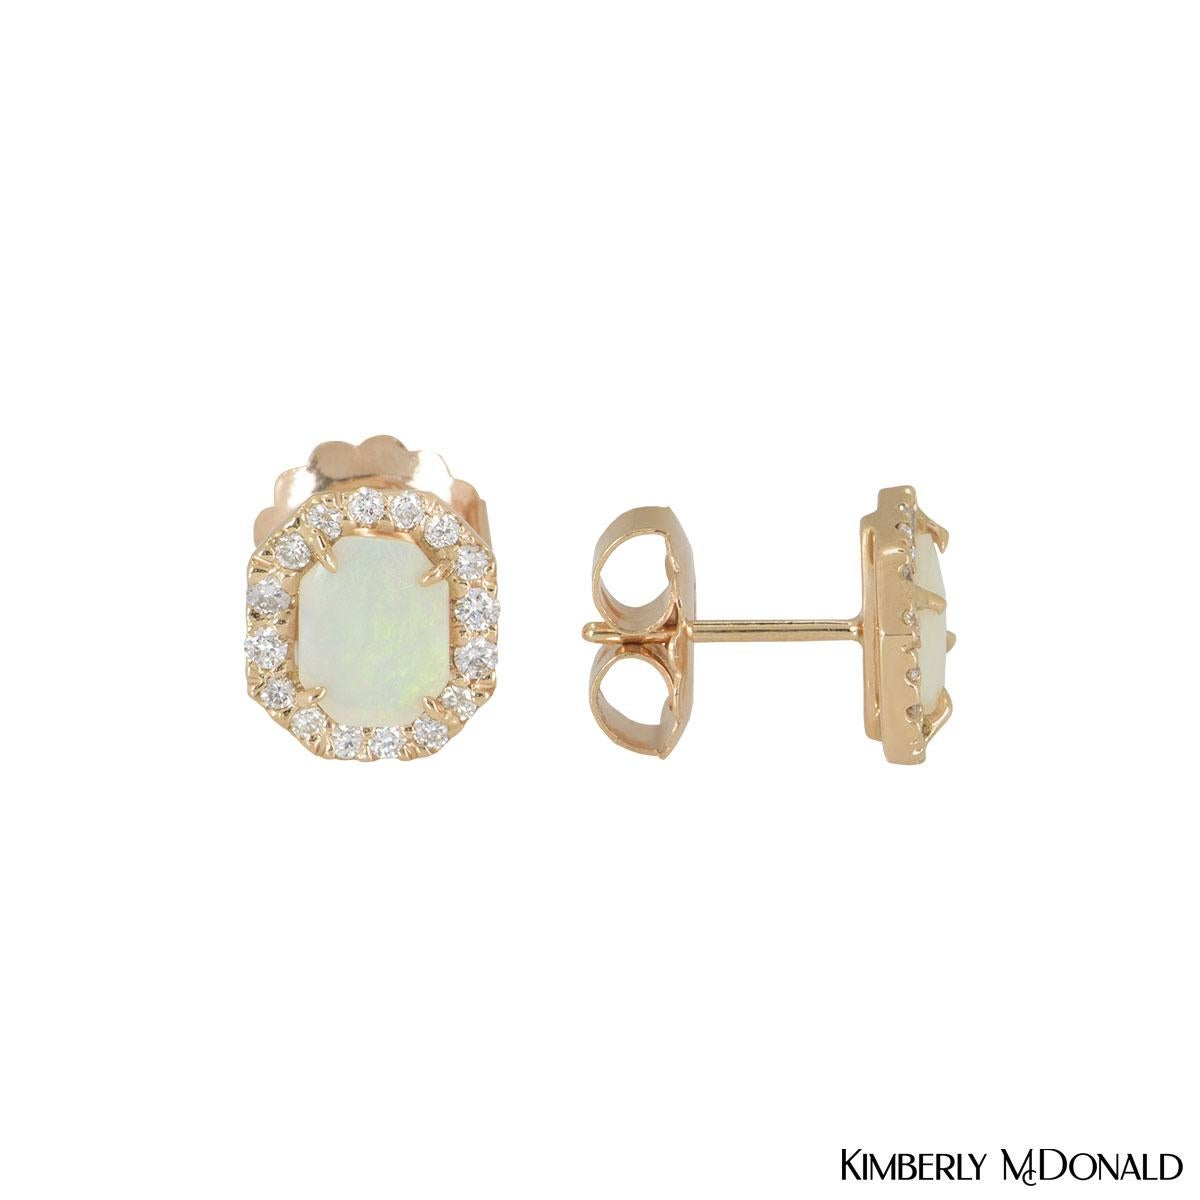 A pair of 18k rose gold opal and diamond earrings by Kimberly McDonald. The earrings are set emerald shaped opal stone in the centre surrounded by pave round brilliant cut diamonds. The 32 diamonds have an approximate weight 0.32ct. The earrings